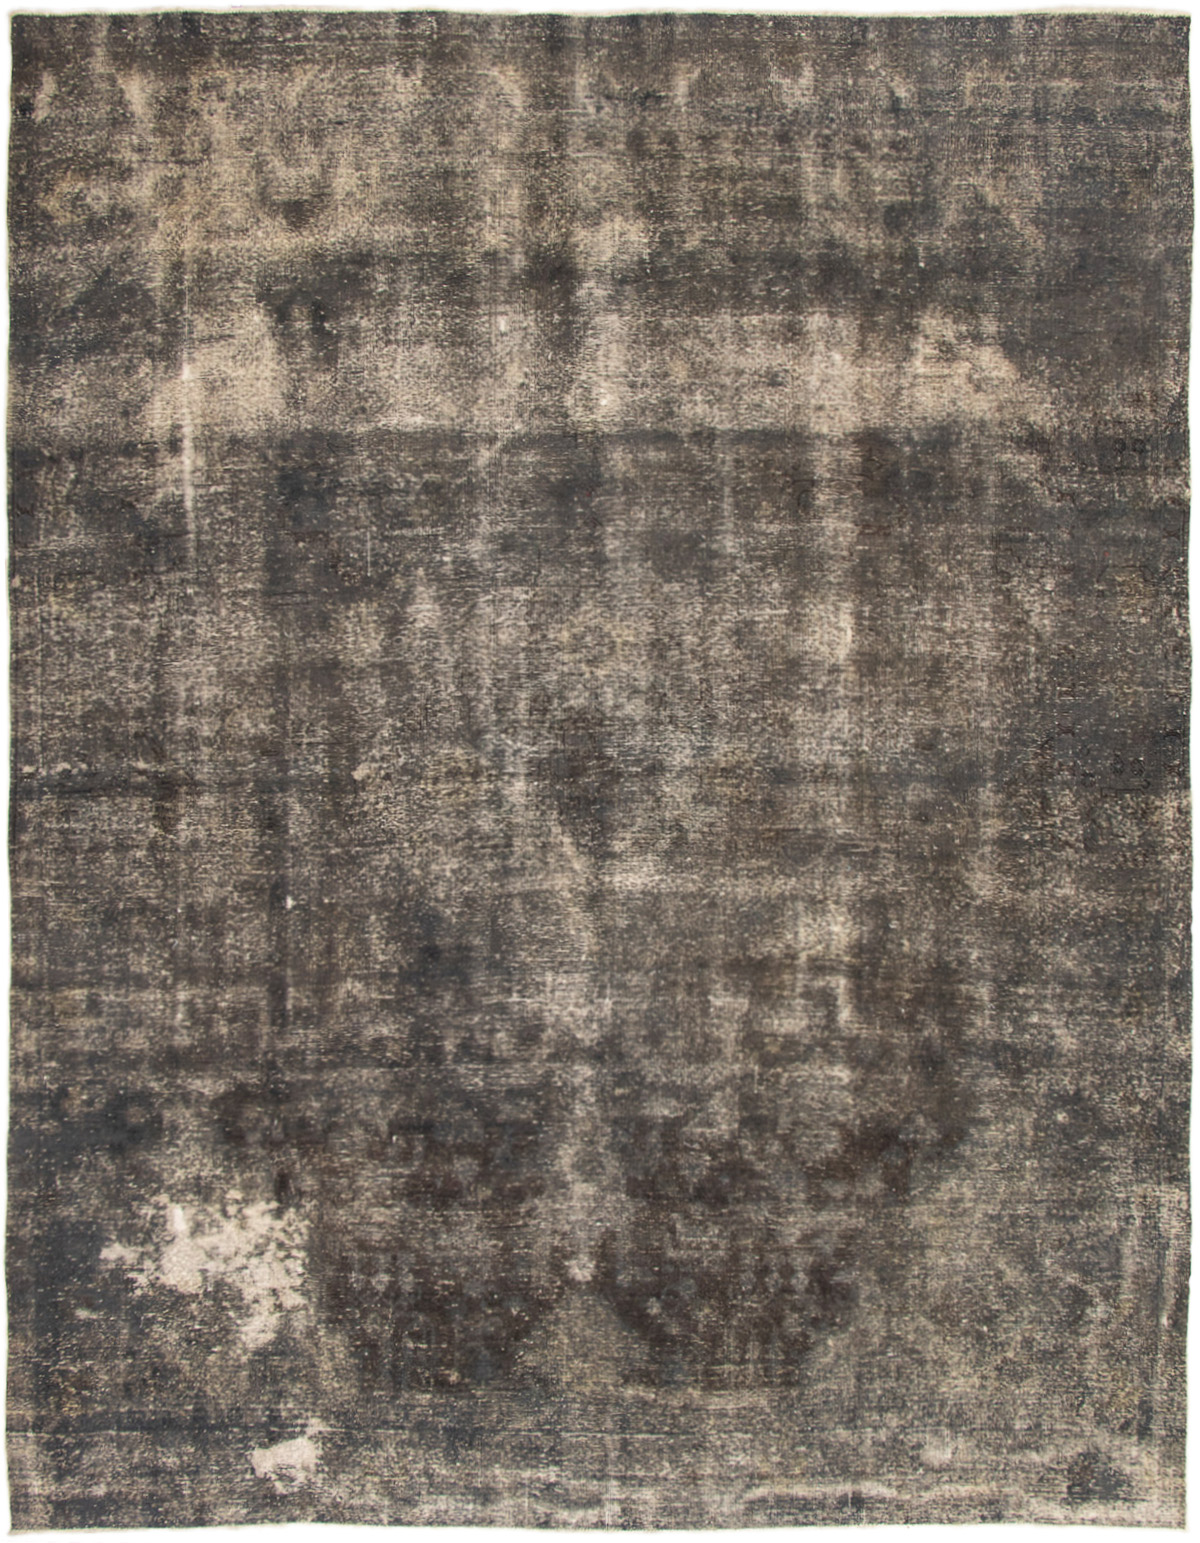 Hand-knotted Color Transition Dark Grey Wool Rug 9'6" x 12'5" Size: 9'6" x 12'5"  